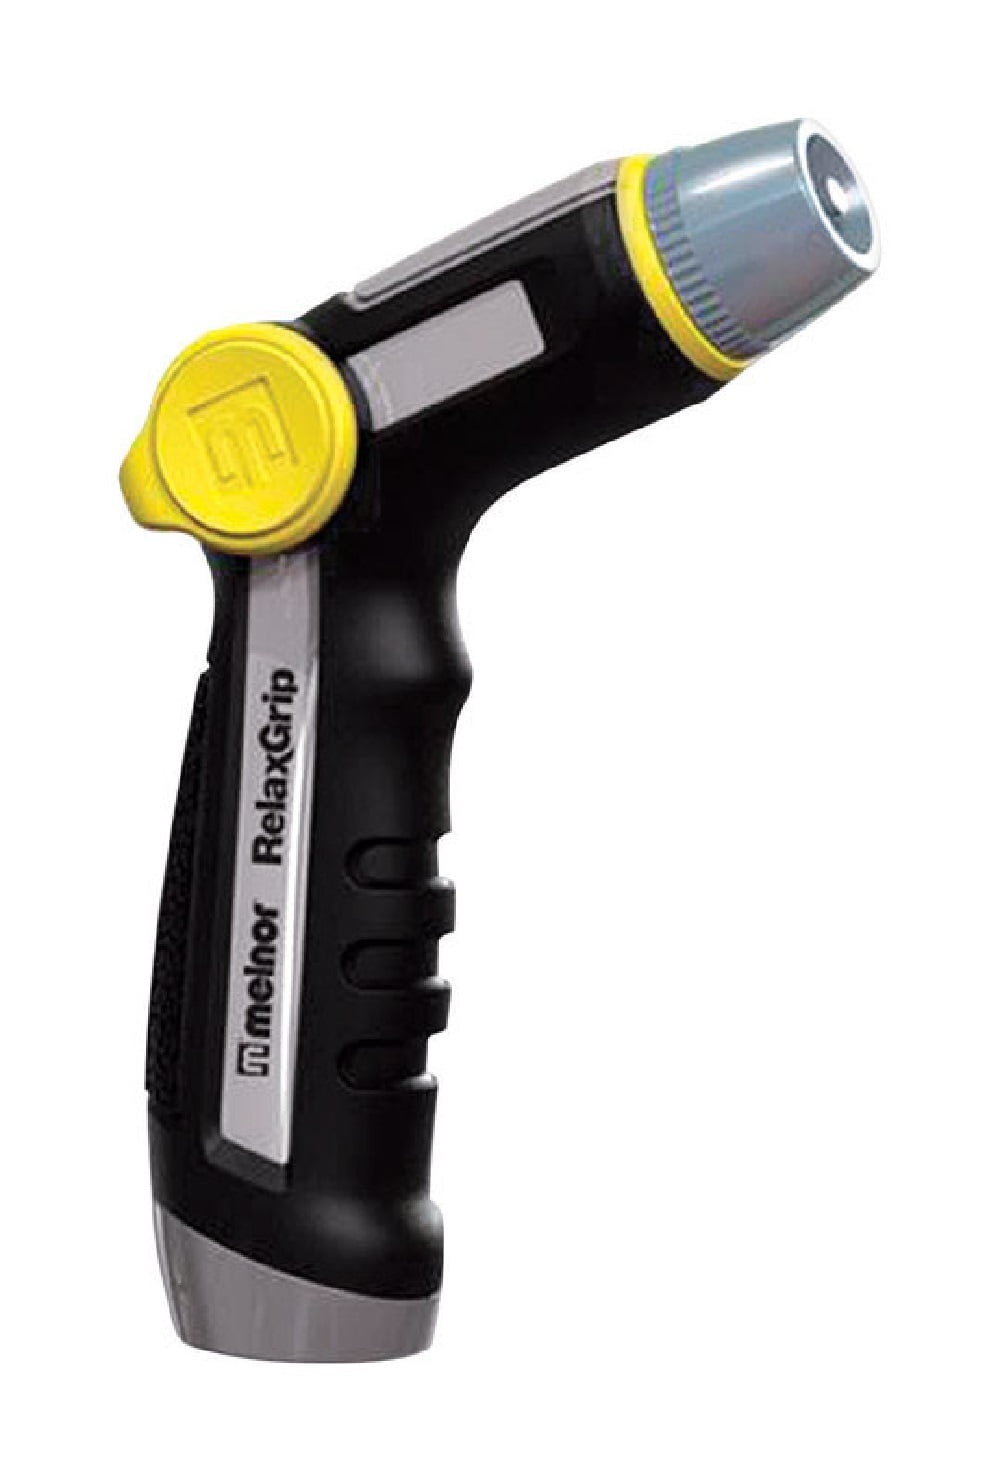 Picture of Melnor 7803125 Metal Hose Nozzle - Black & Yellow